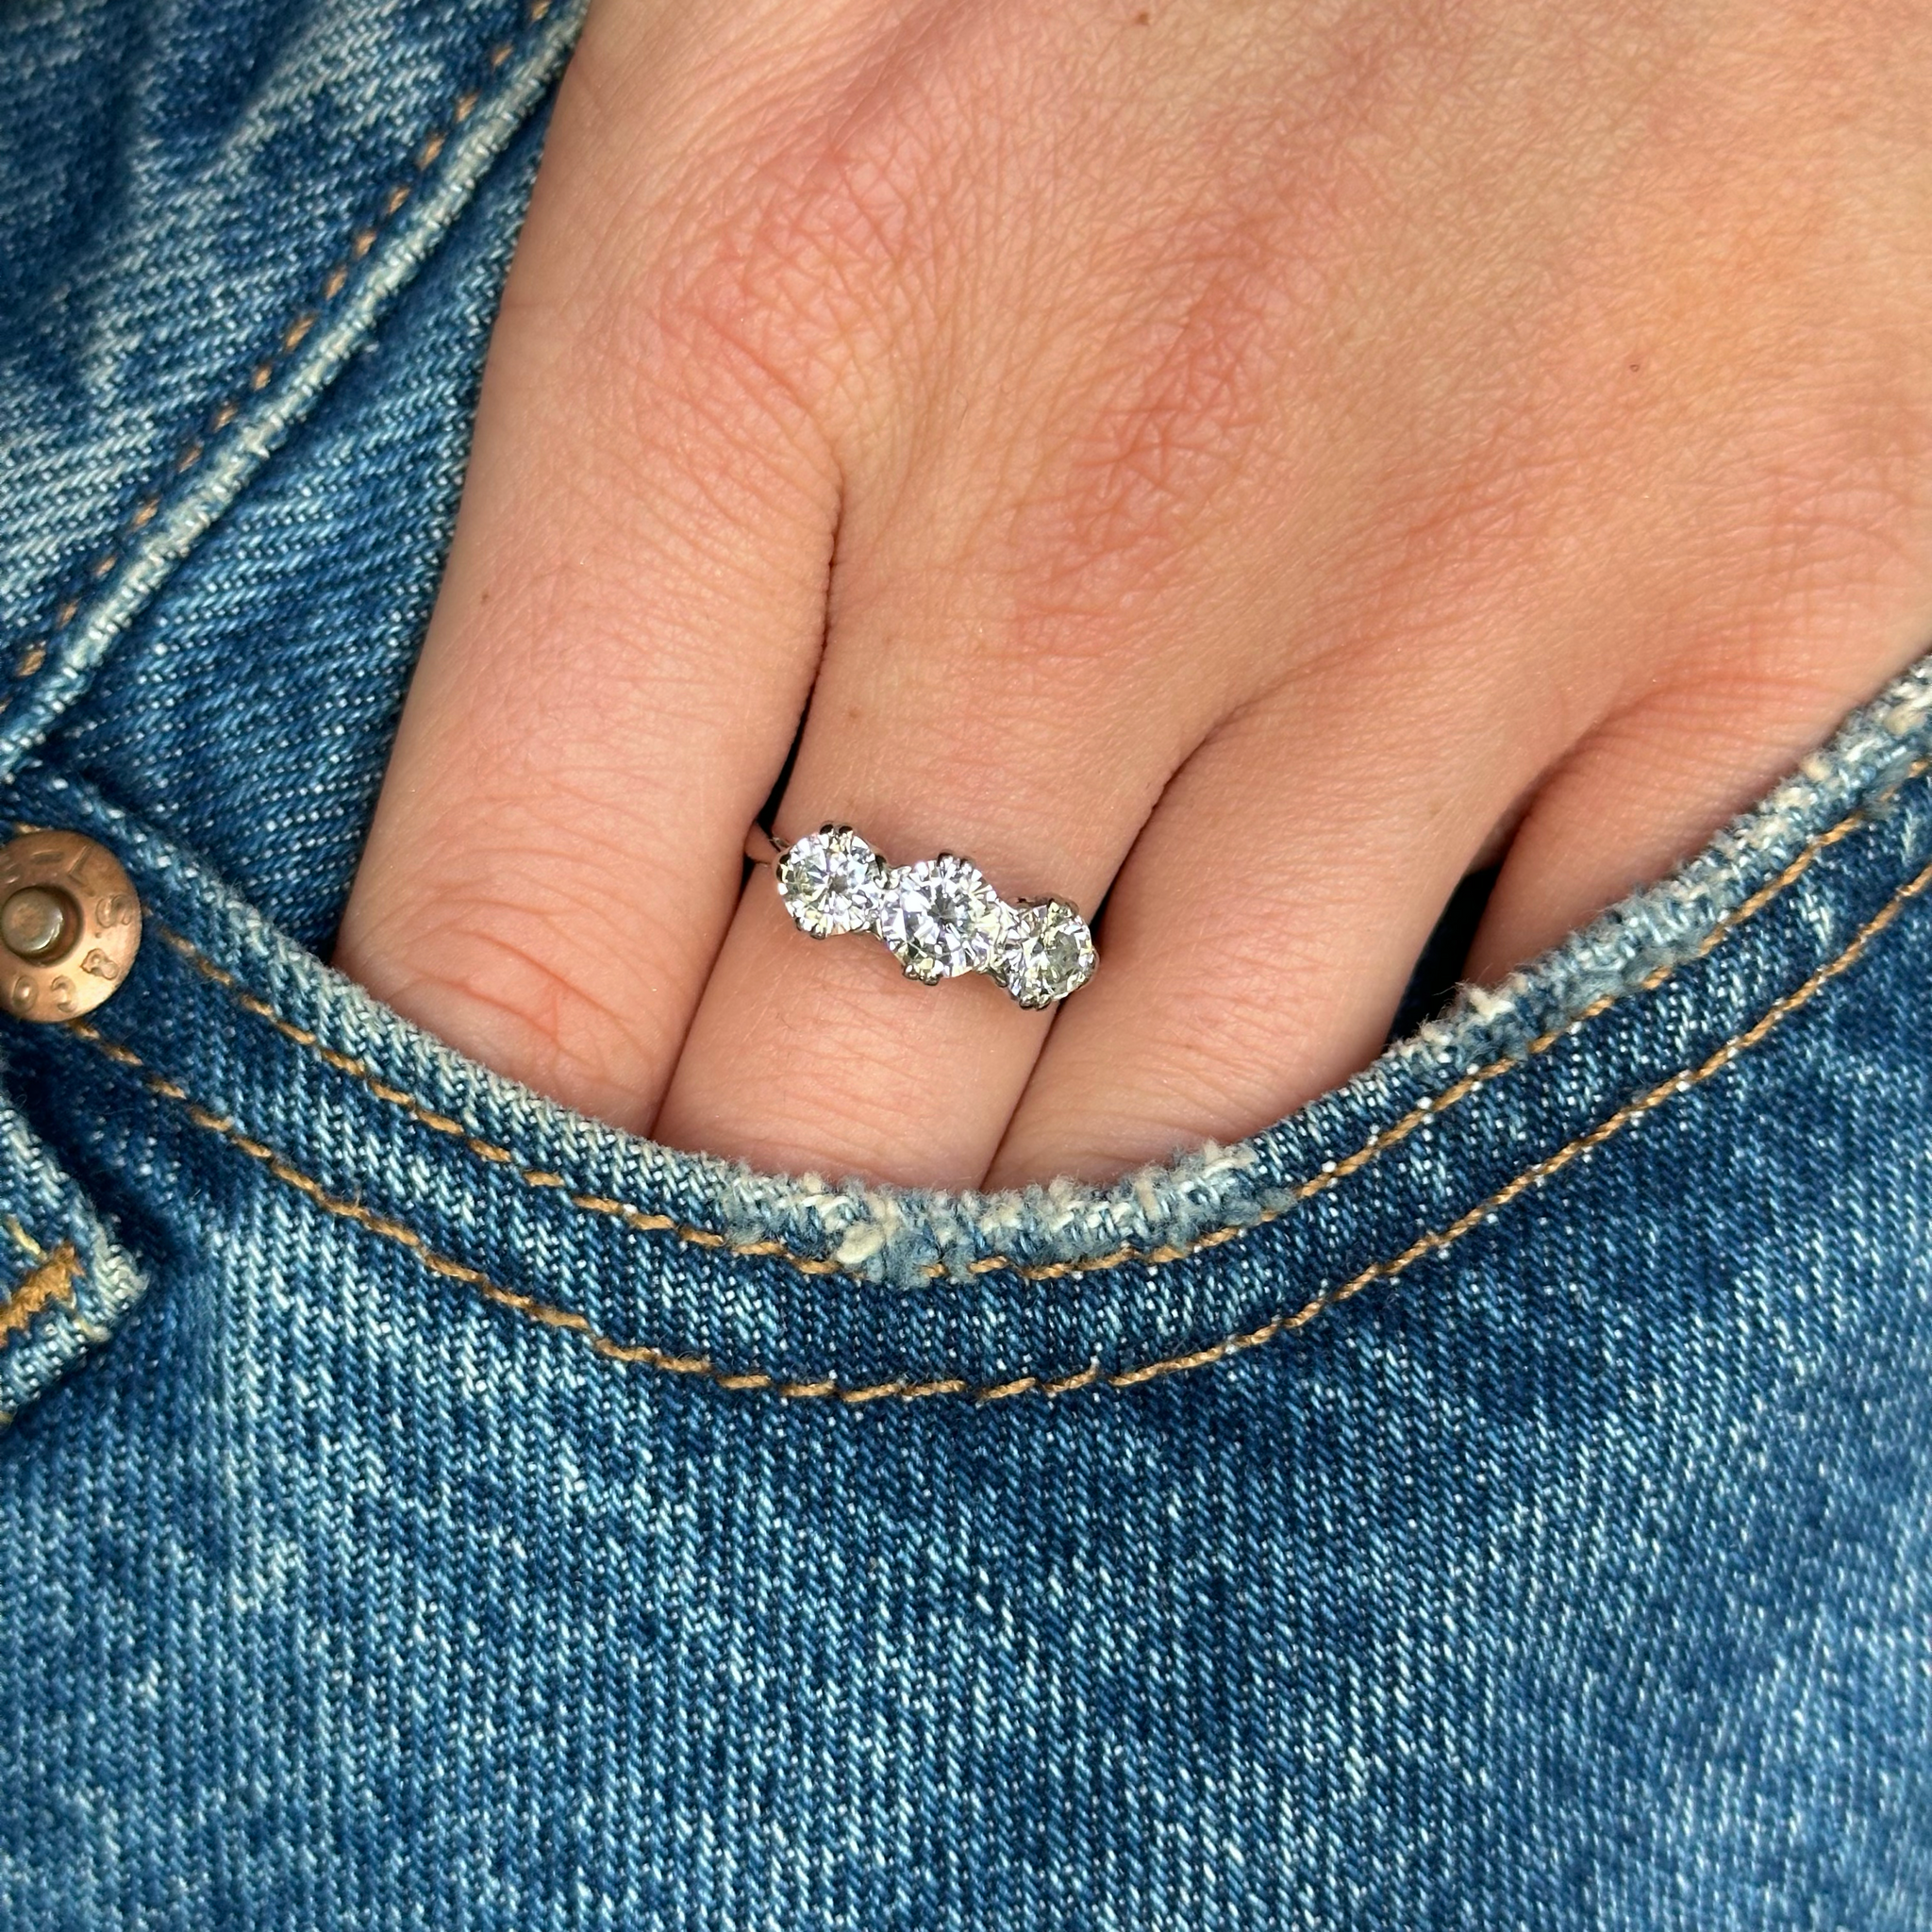 three stone diamond ring worn on hand in pocket of jeans.